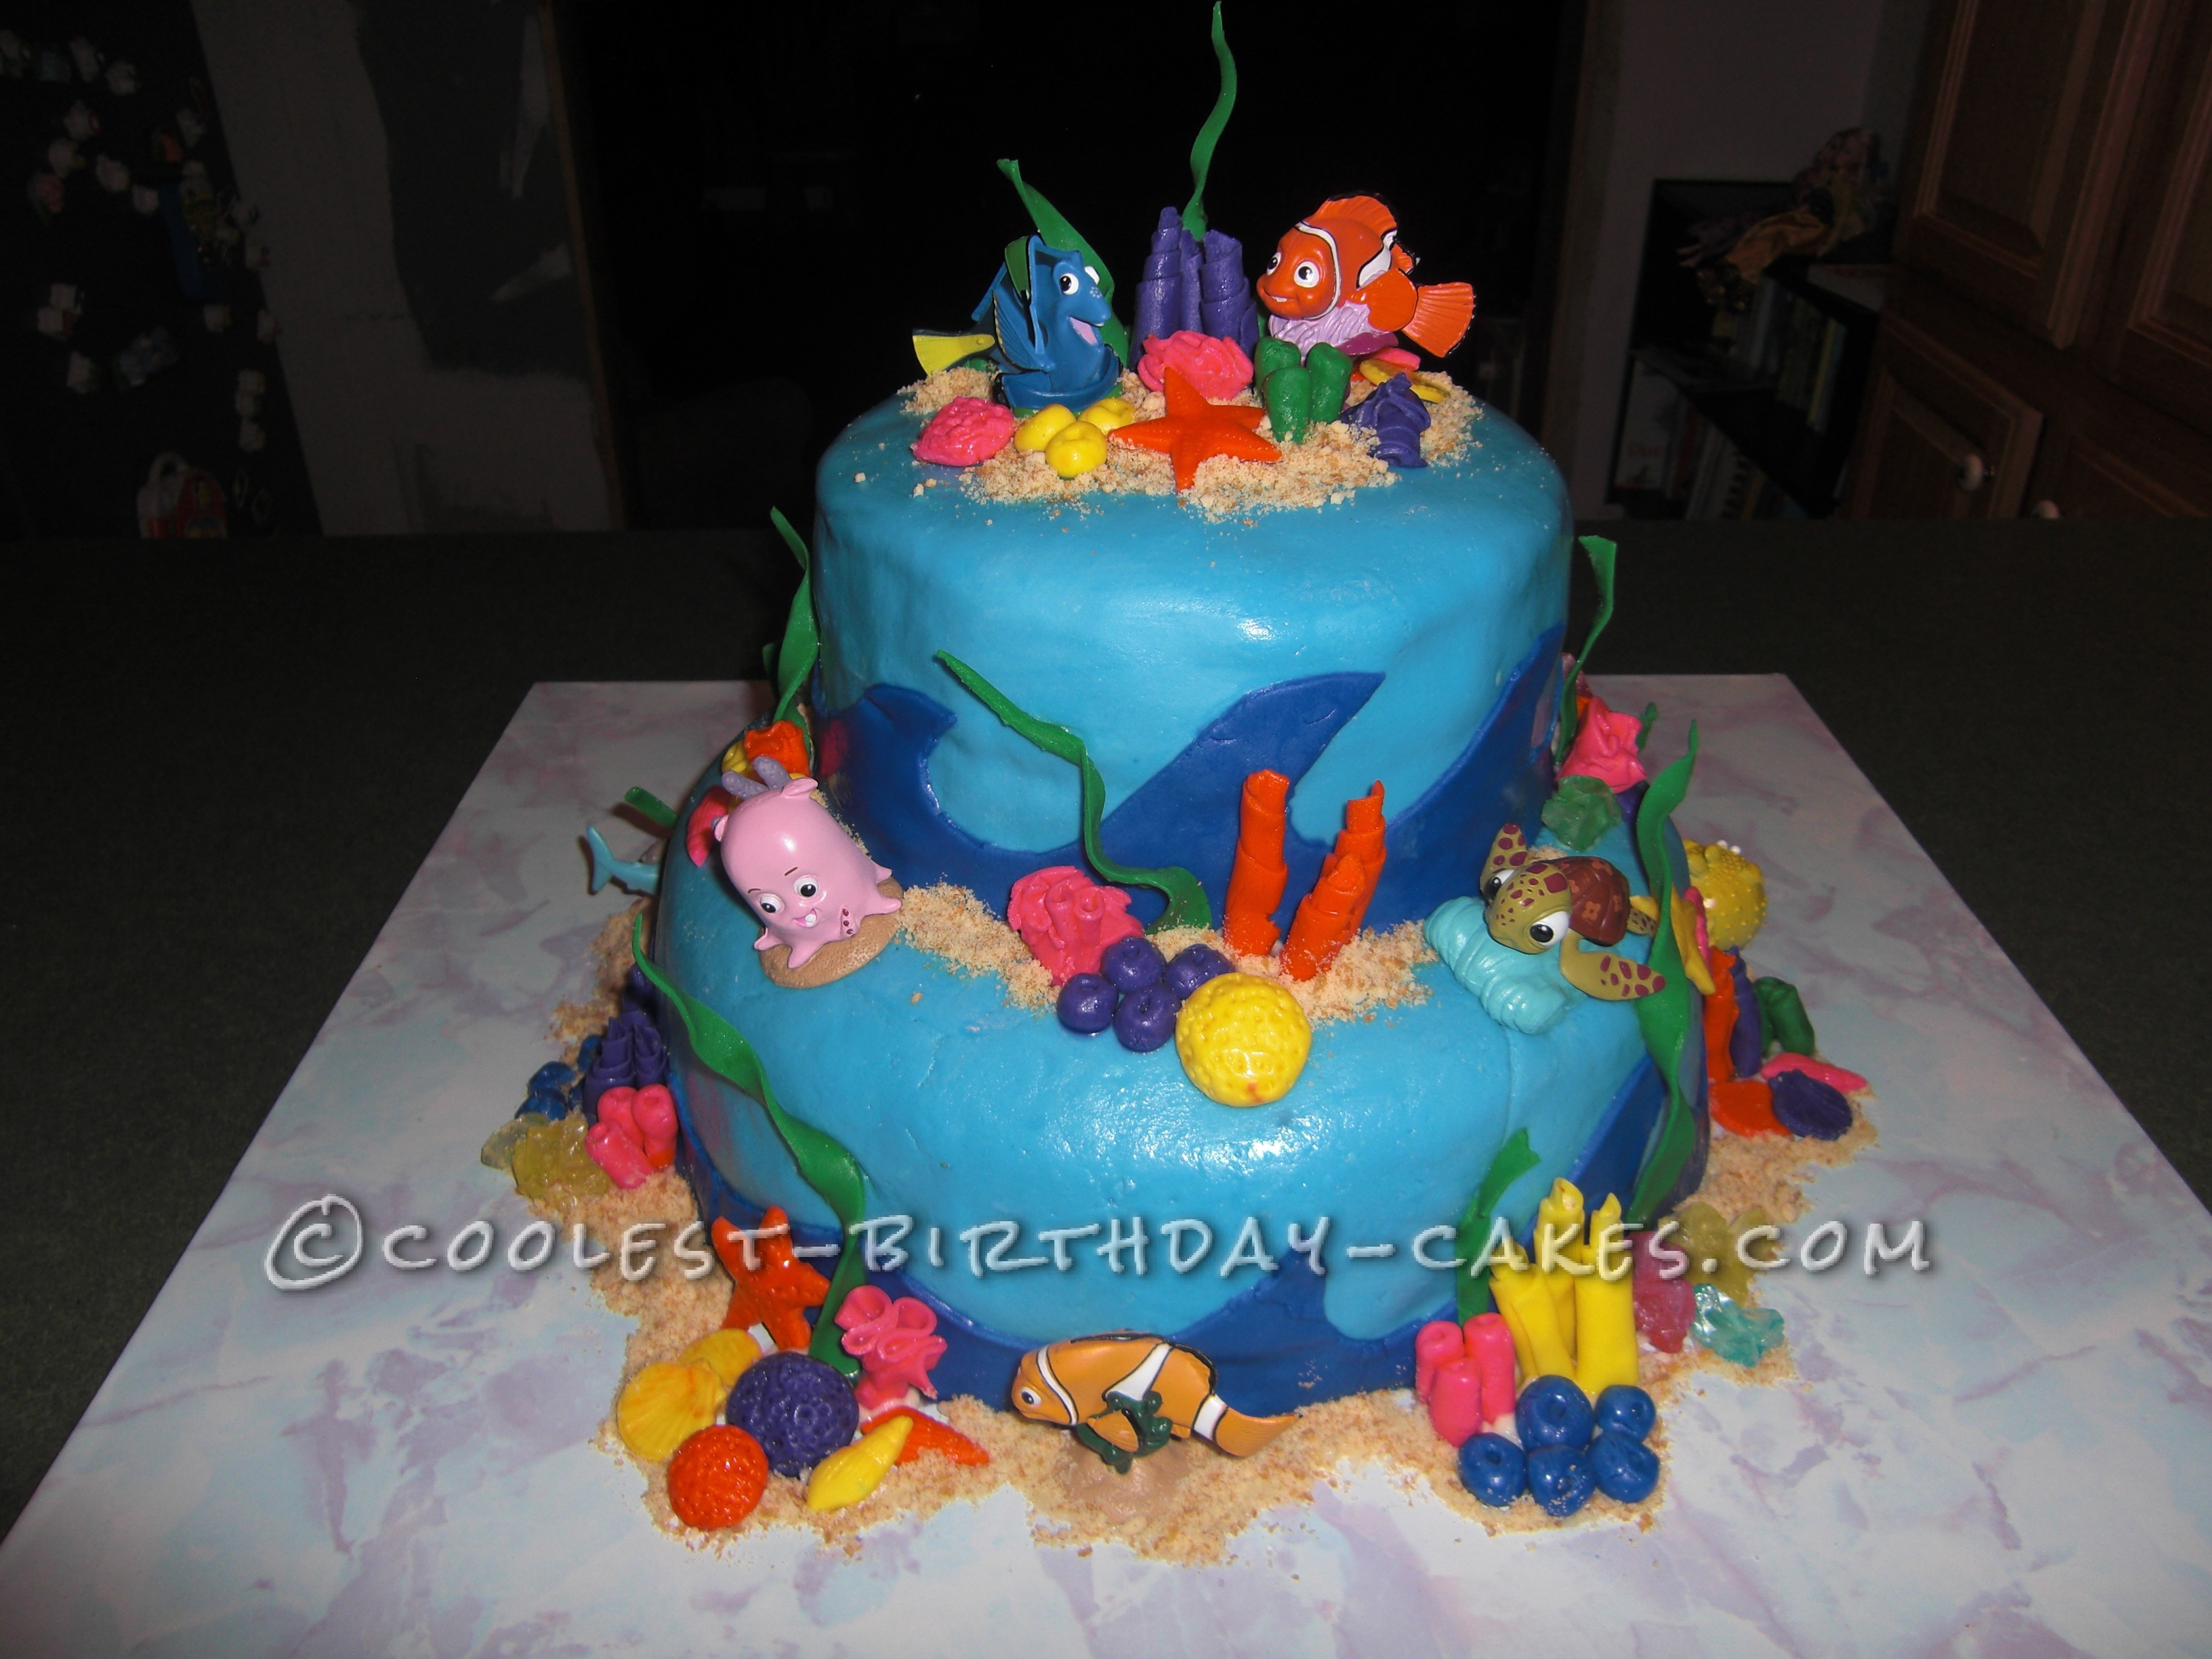 Coolest Nemo Birthday Cake for a 3 Year Old Boy